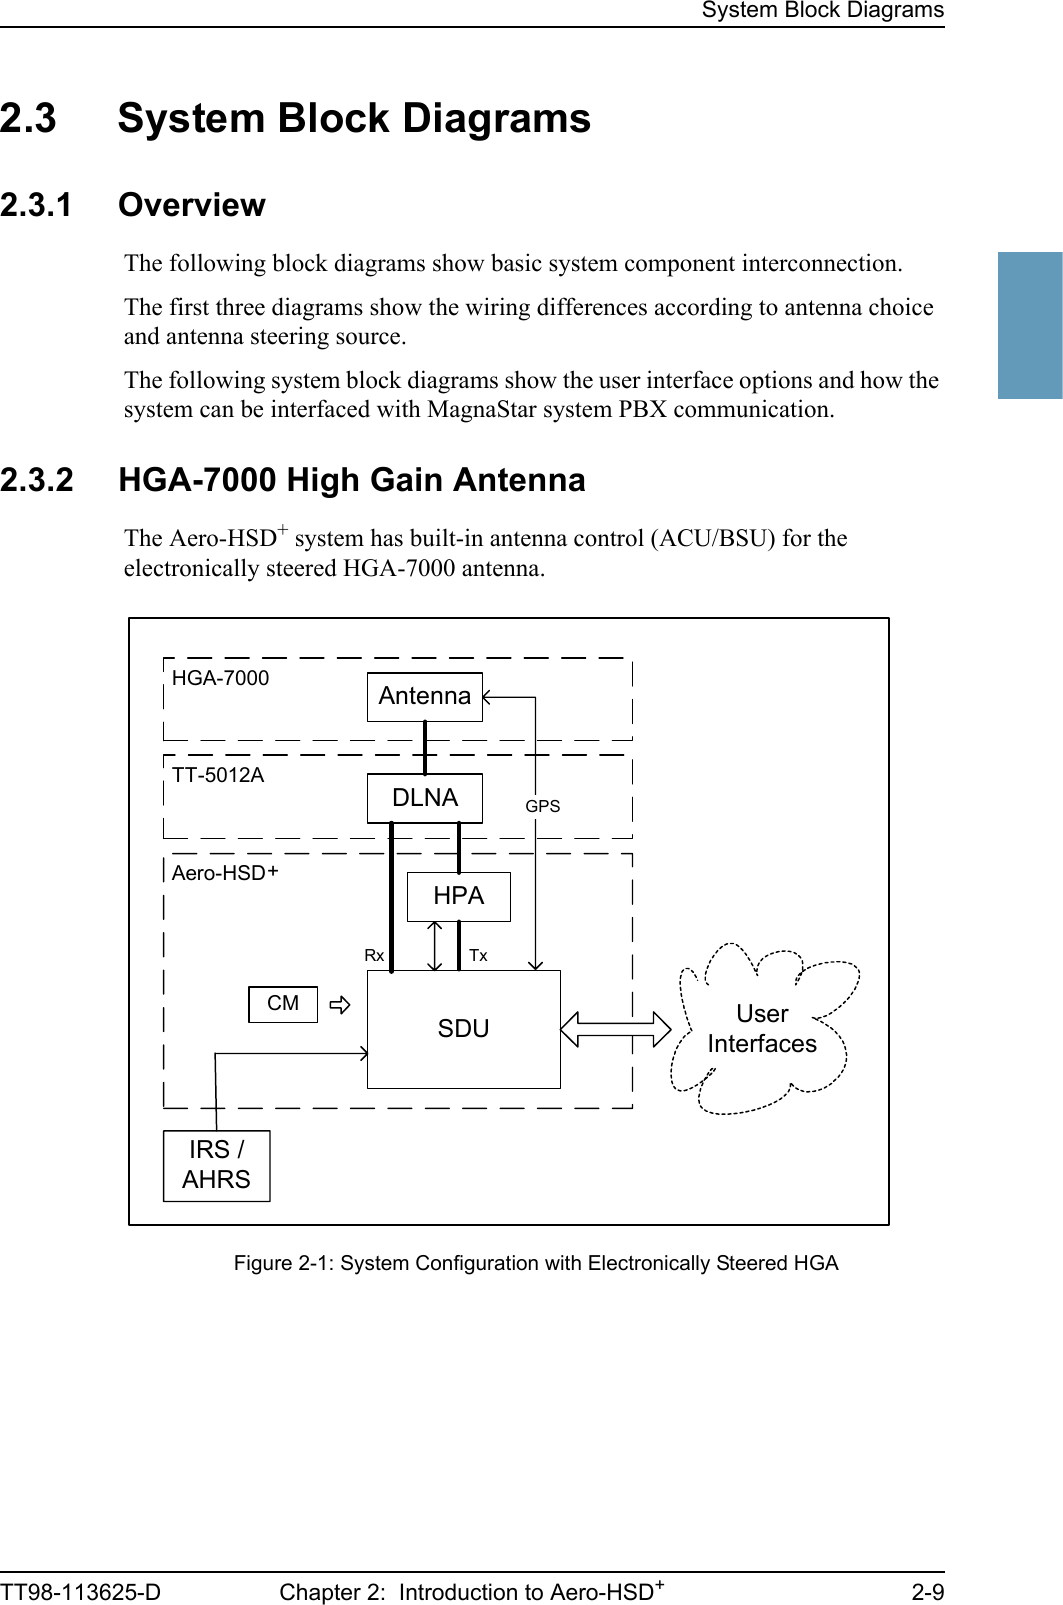 System Block DiagramsTT98-113625-D Chapter 2:  Introduction to Aero-HSD+2-922222.3 System Block Diagrams2.3.1 OverviewThe following block diagrams show basic system component interconnection. The first three diagrams show the wiring differences according to antenna choice and antenna steering source. The following system block diagrams show the user interface options and how the system can be interfaced with MagnaStar system PBX communication.2.3.2 HGA-7000 High Gain AntennaThe Aero-HSD+ system has built-in antenna control (ACU/BSU) for the electronically steered HGA-7000 antenna.Figure 2-1: System Configuration with Electronically Steered HGAAntennaHPAHGA-7000DLNASDUIRS /AHRSAero-HSDCM+UserInterfacesTT-5012AGPSTxRx